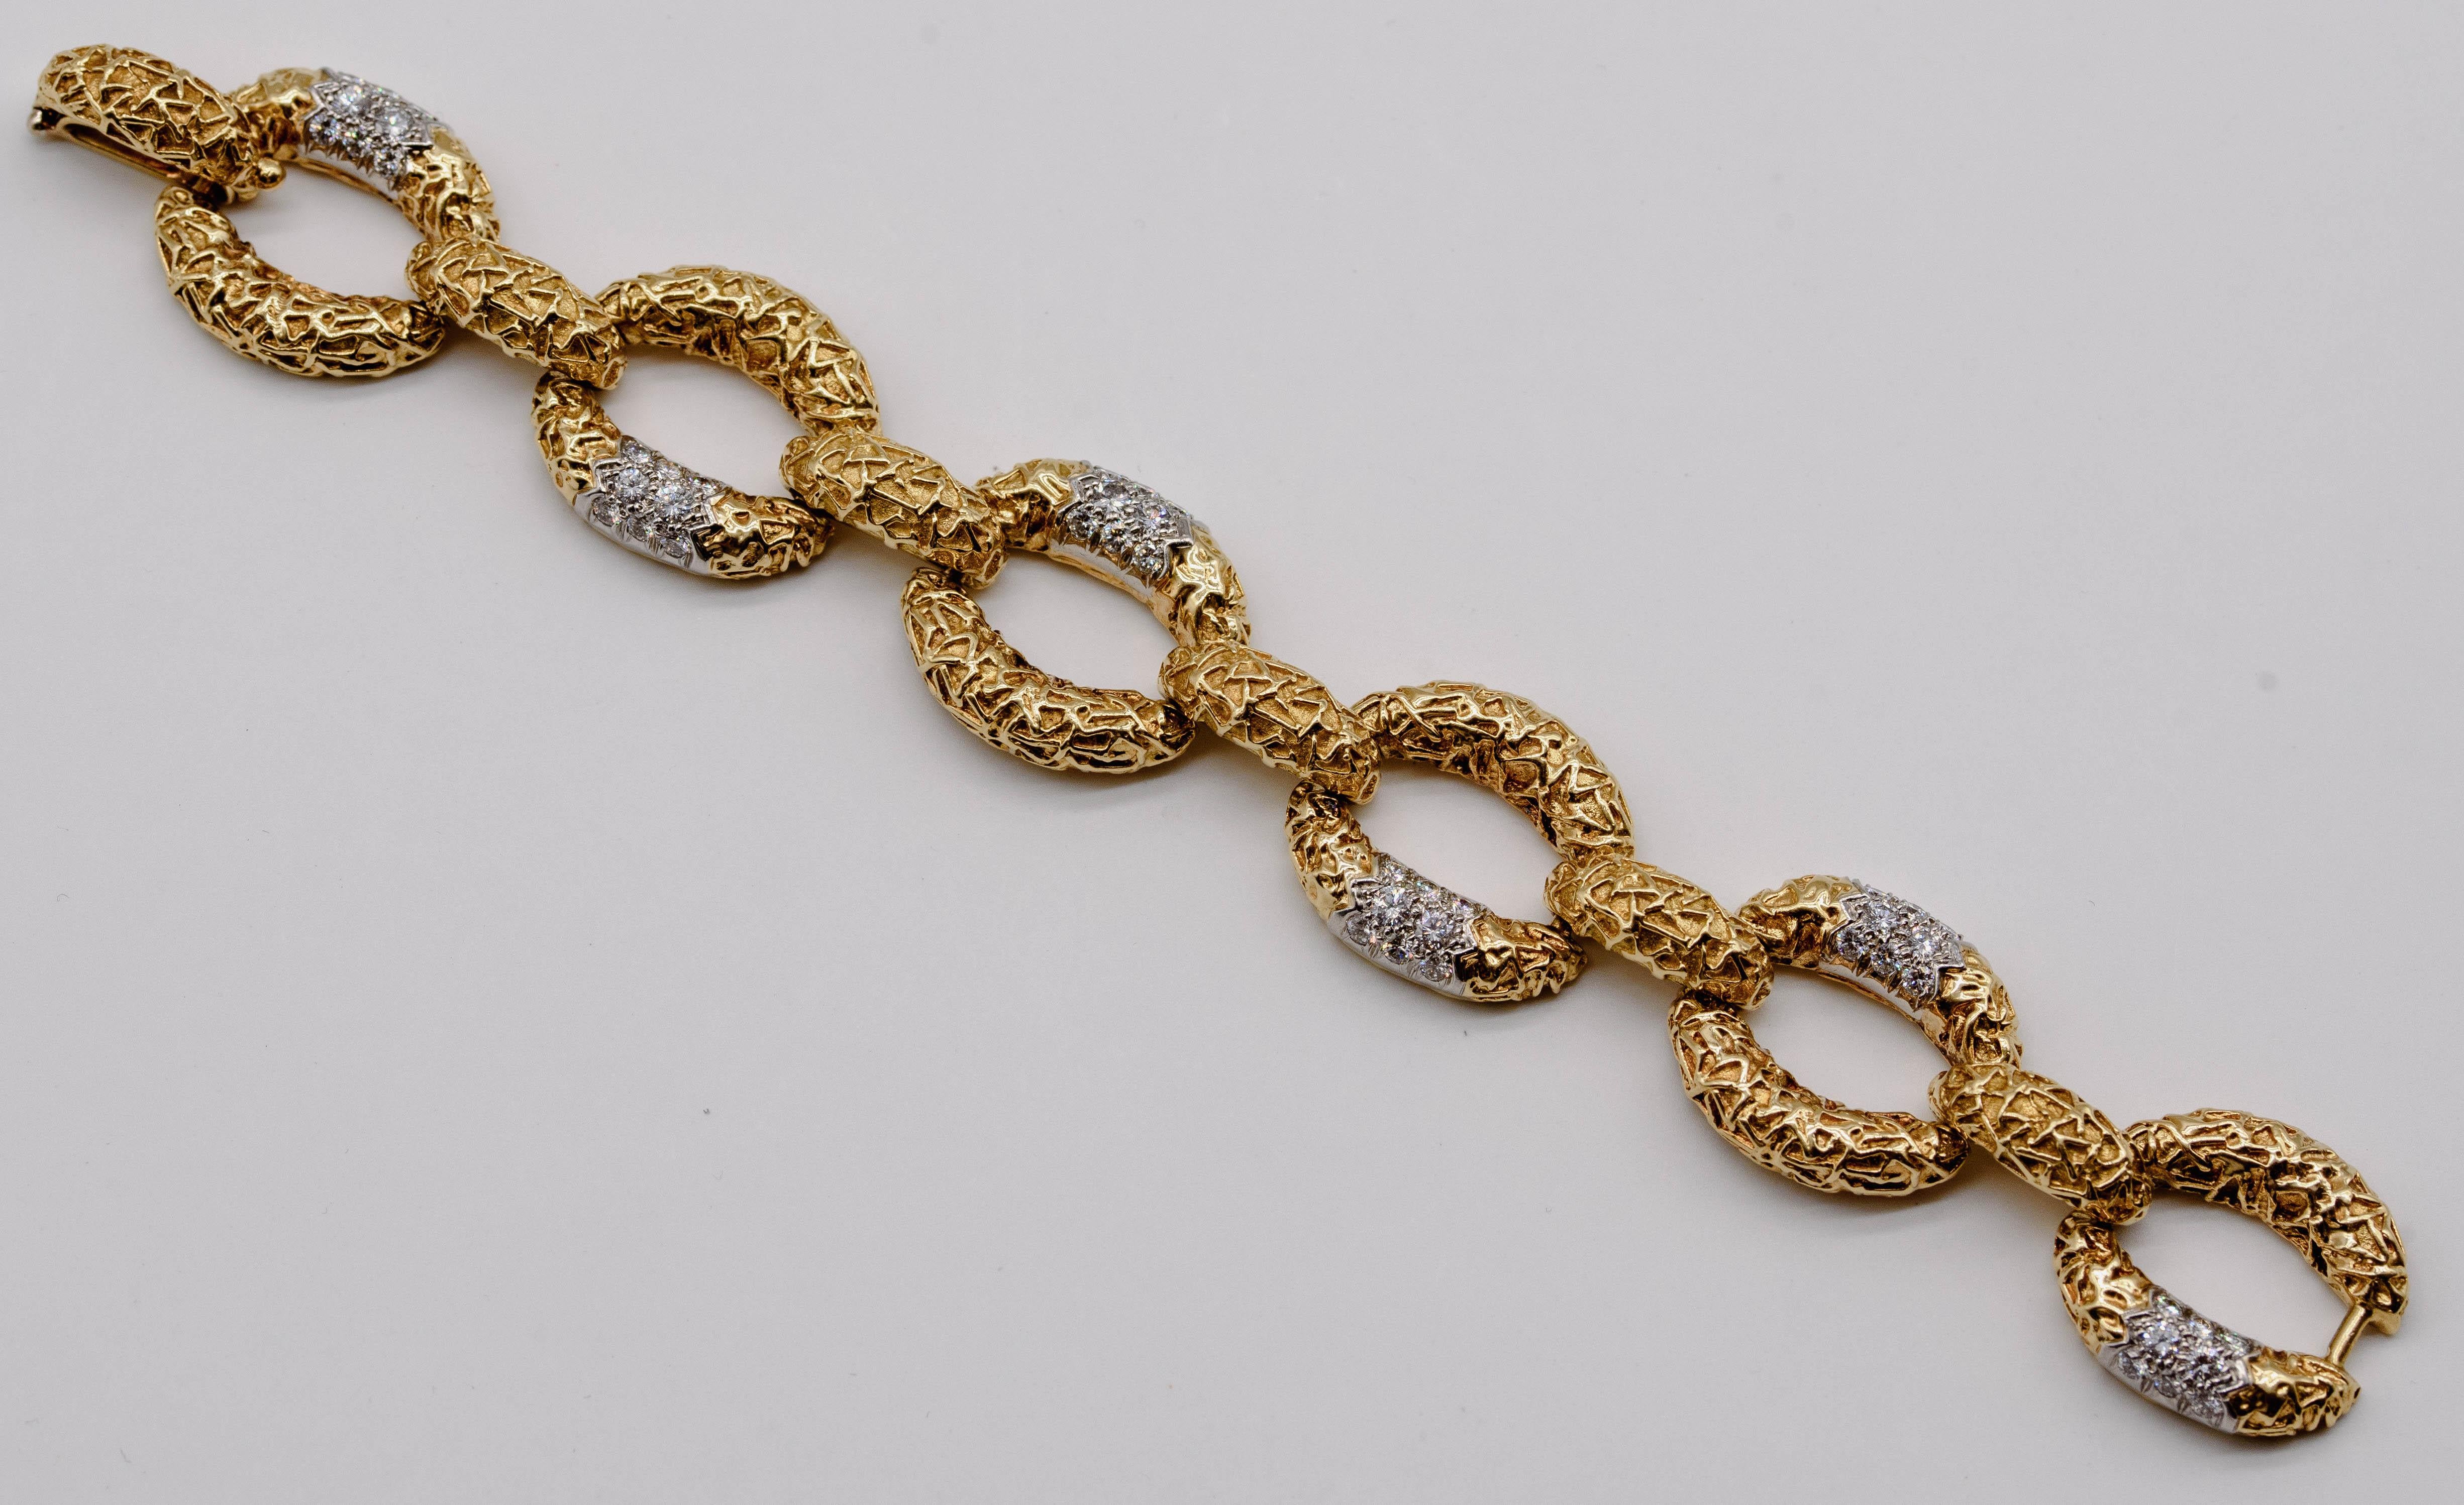 A true classic, this sensational bracelet would be a winner even if it didn't boast the signature of Van Cleef & Arpels, one of the most revered names in signed jewelry. The bracelet consists of six oval textured 18 karat gold links joined by domed